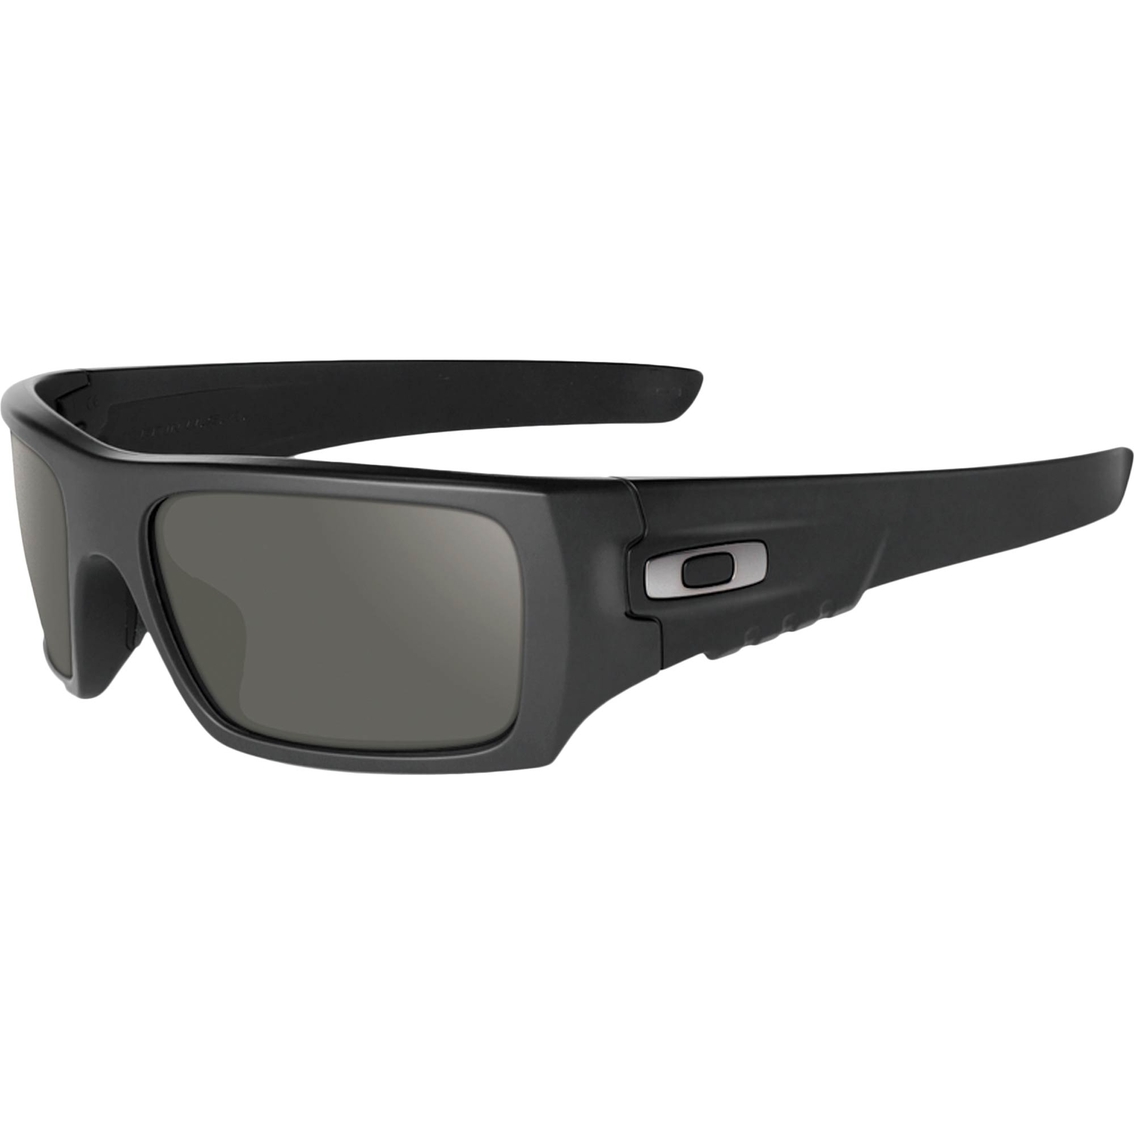 ansi approved oakley sunglasses